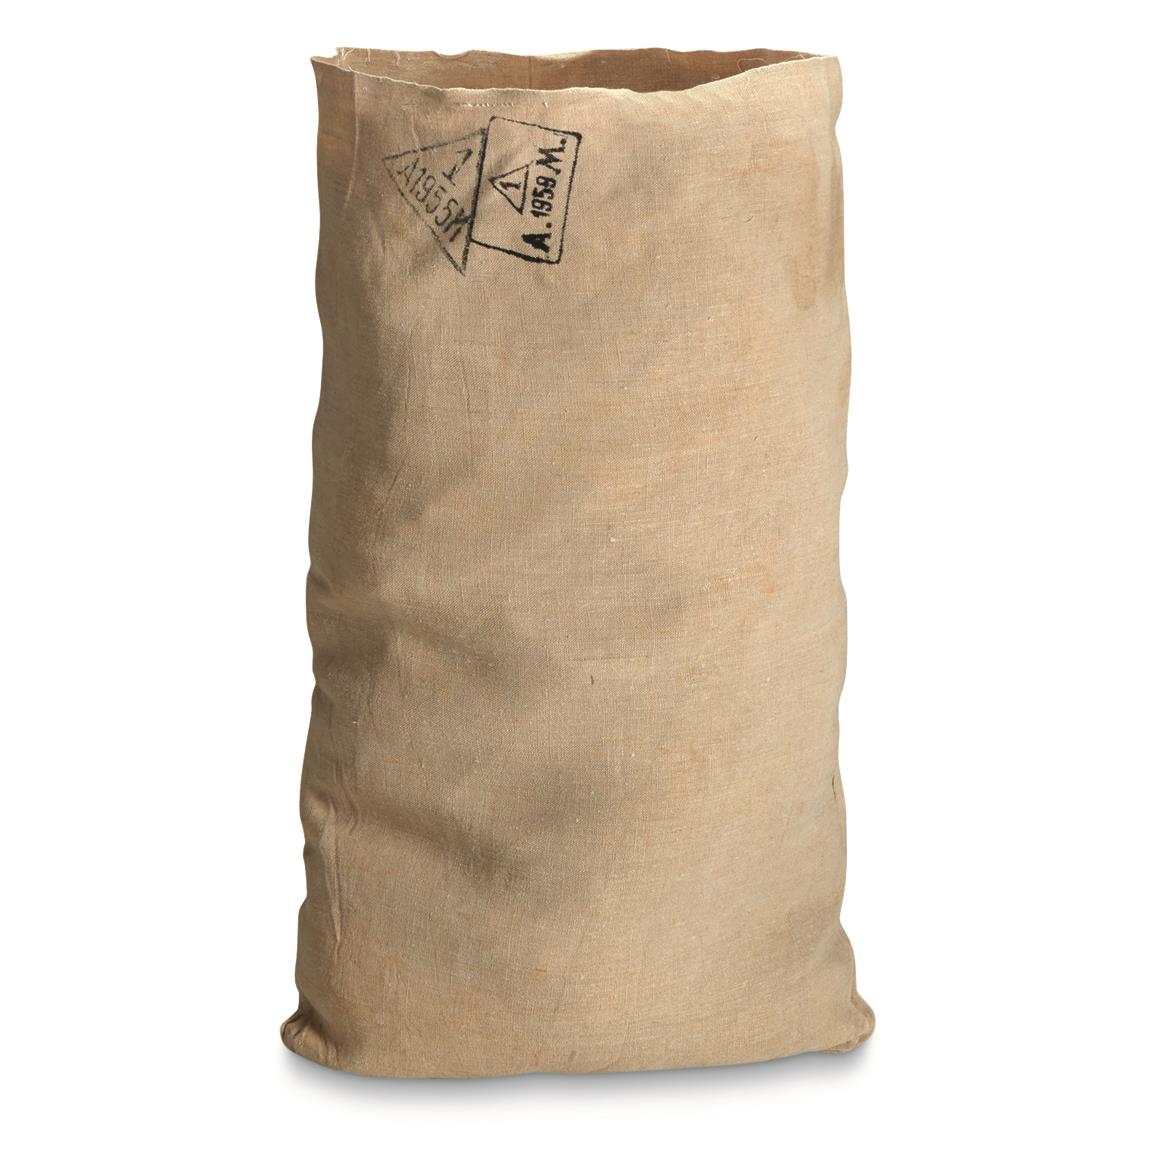 Italian Military Surplus Linen Canvas Bags, 10 Pack, Like New